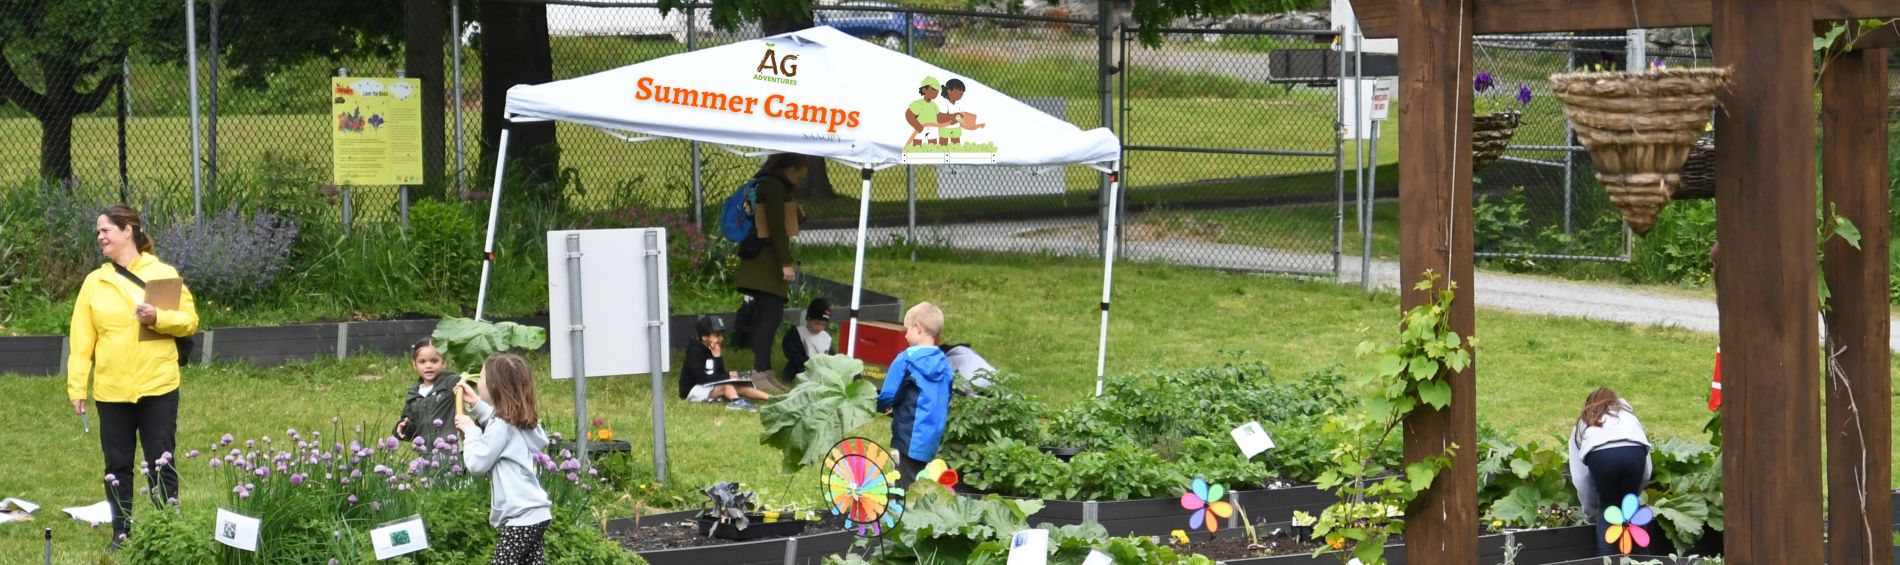 Summer Camps - Greens, Beans and Tomatoes